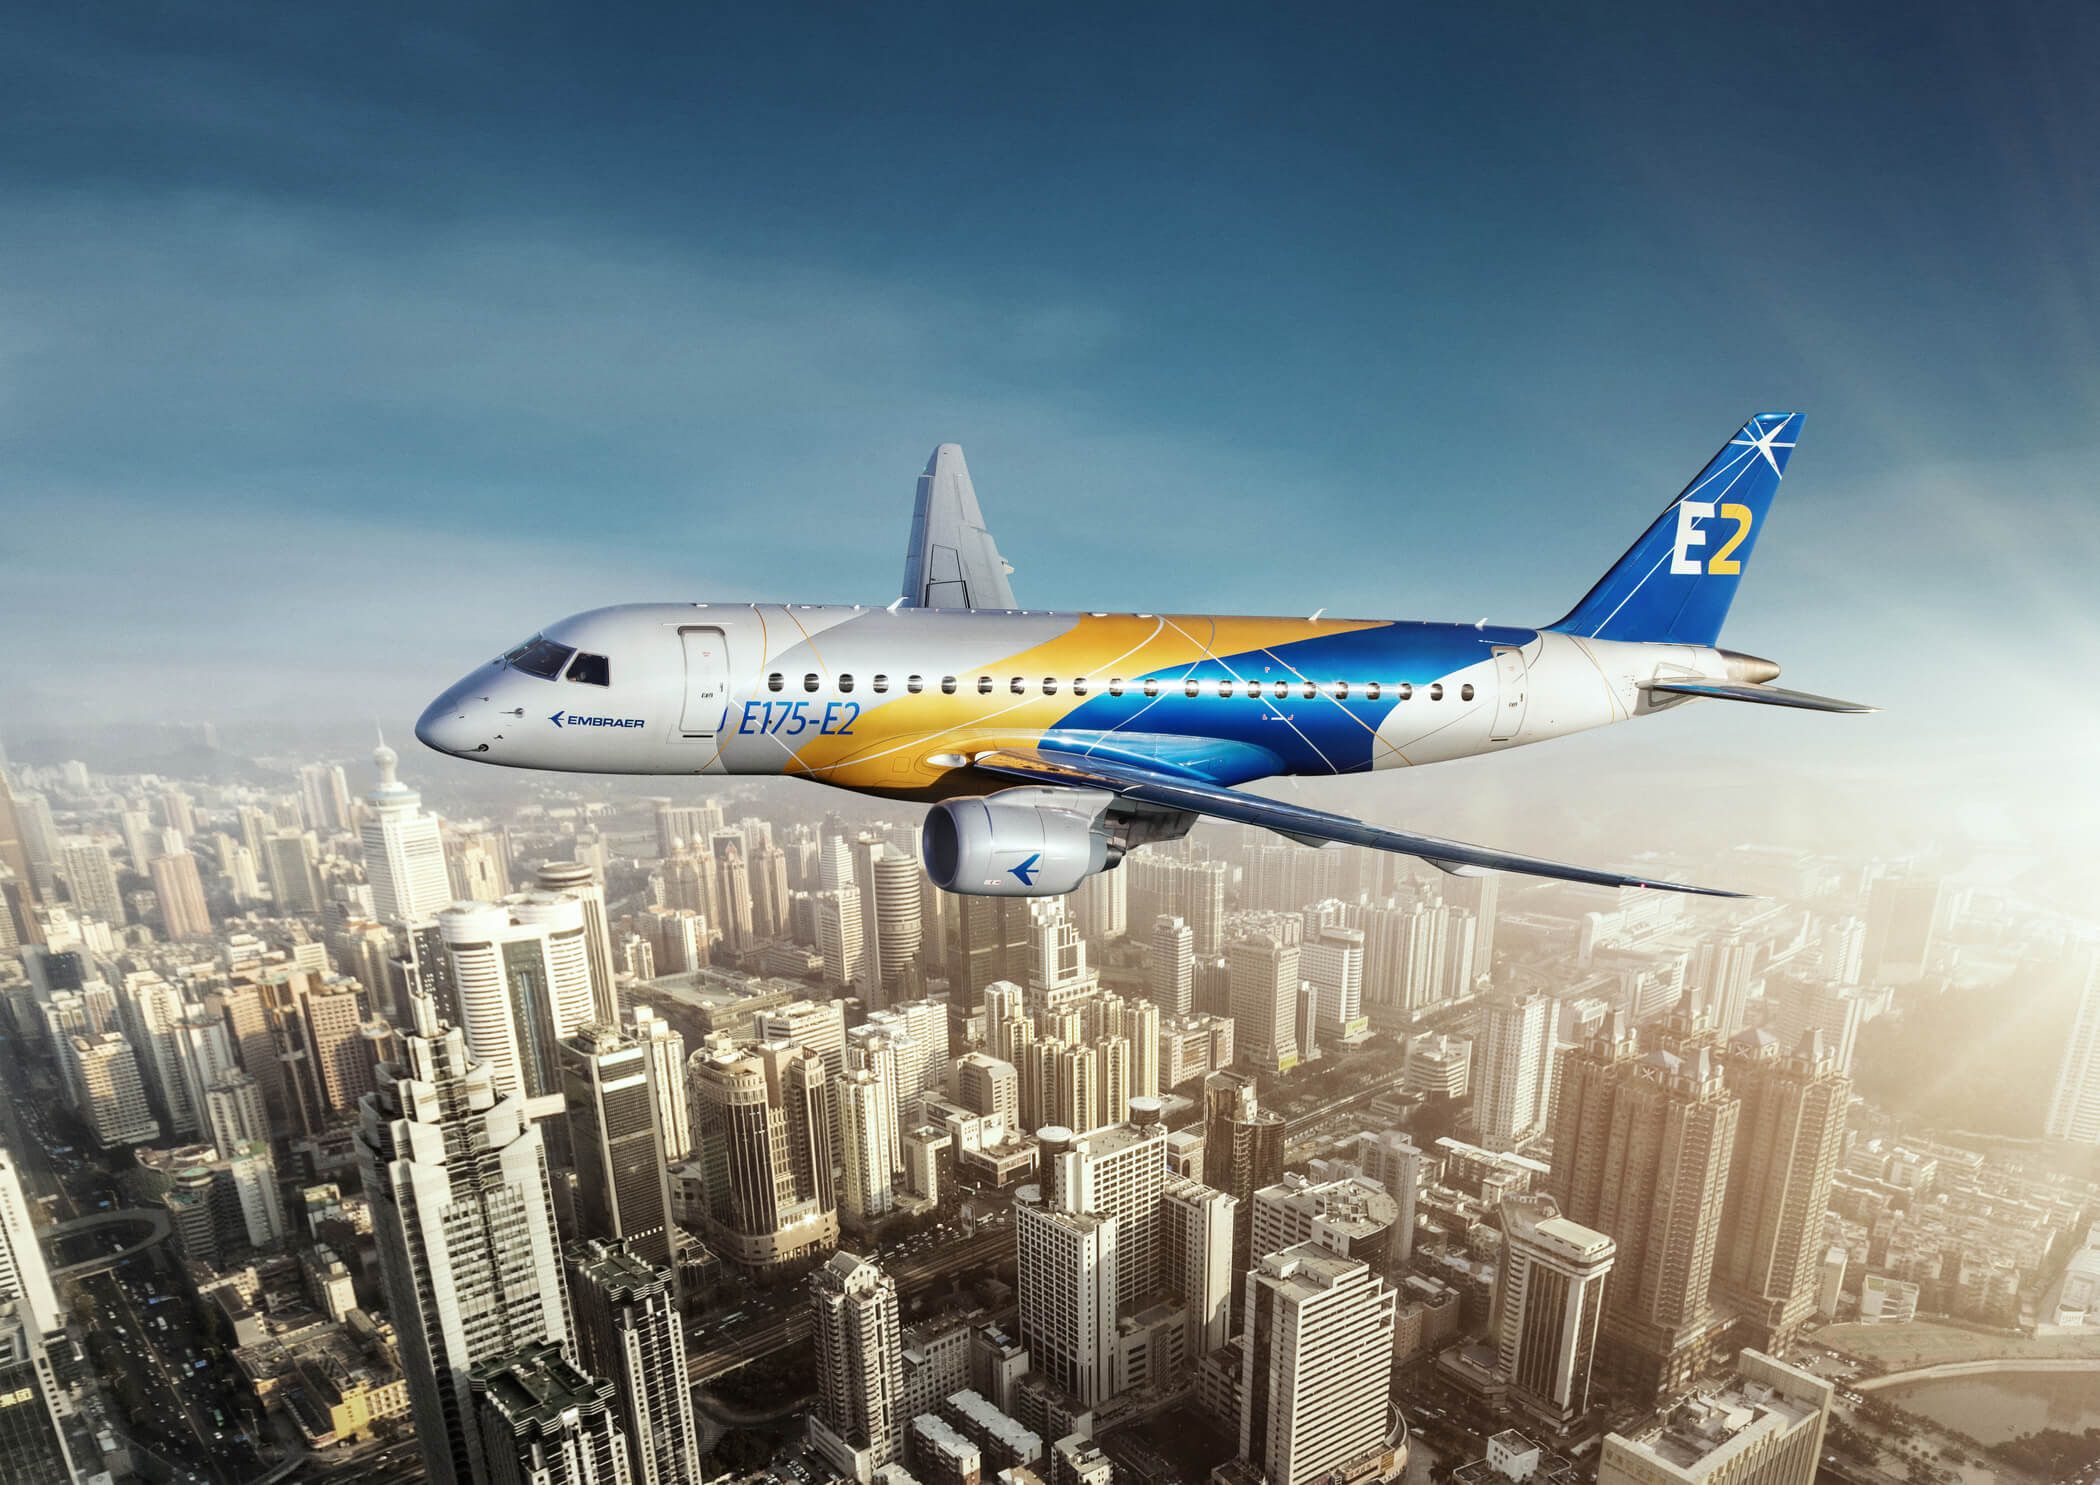 An Embraer E2 jet flying over a large city.